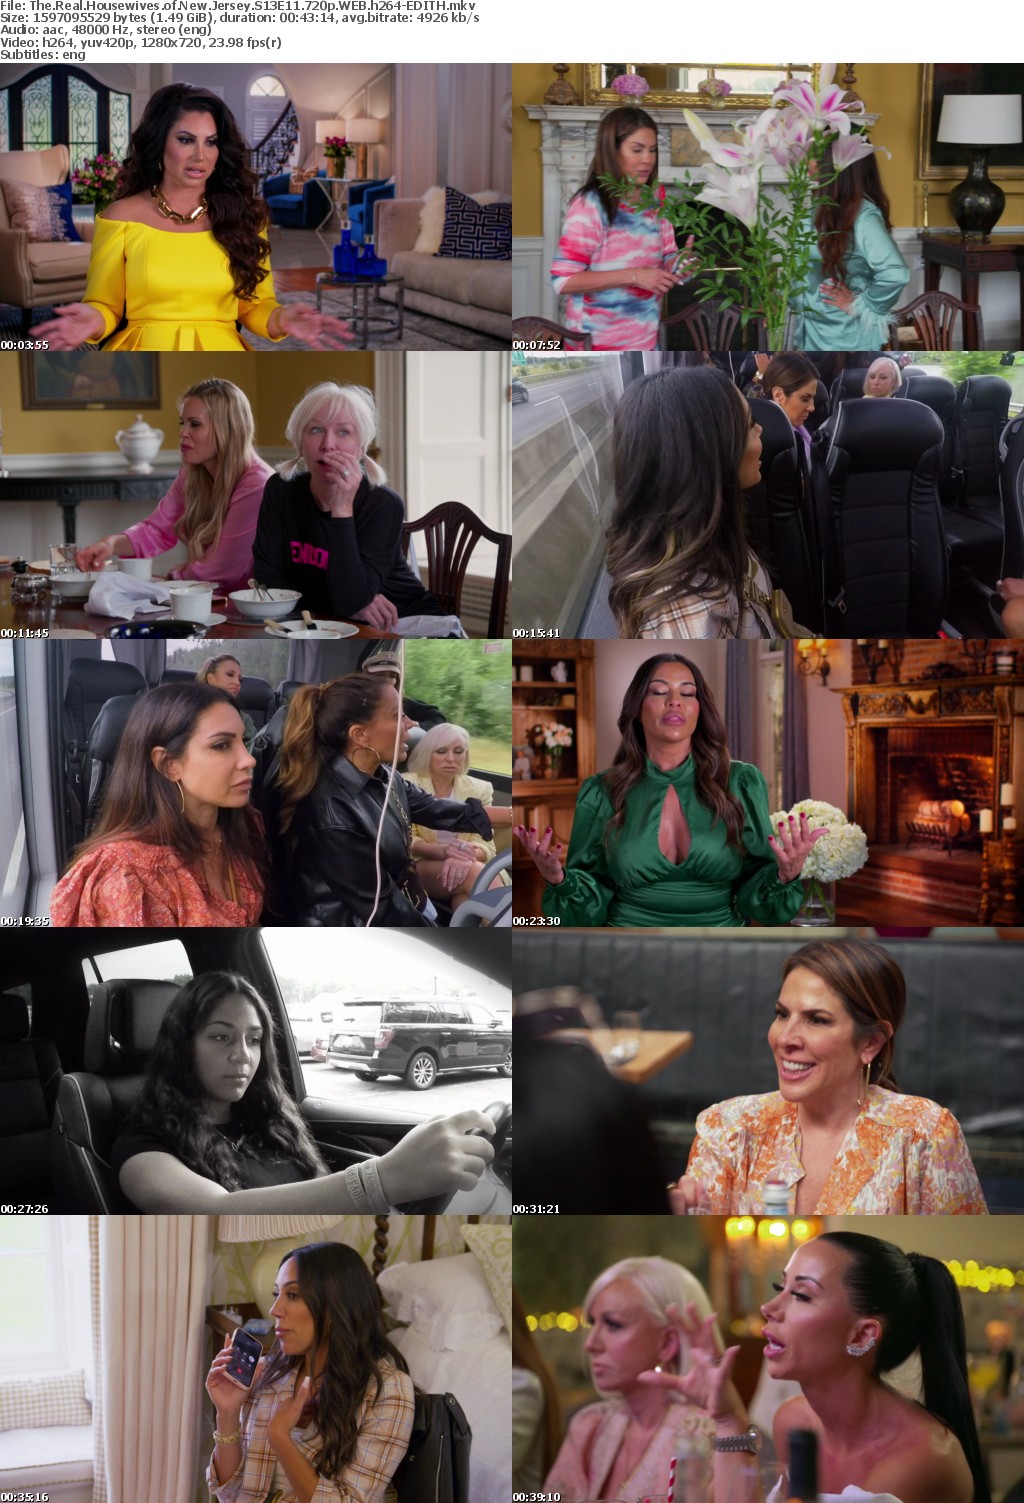 The Real Housewives of New Jersey S13E11 720p WEB h264-EDITH